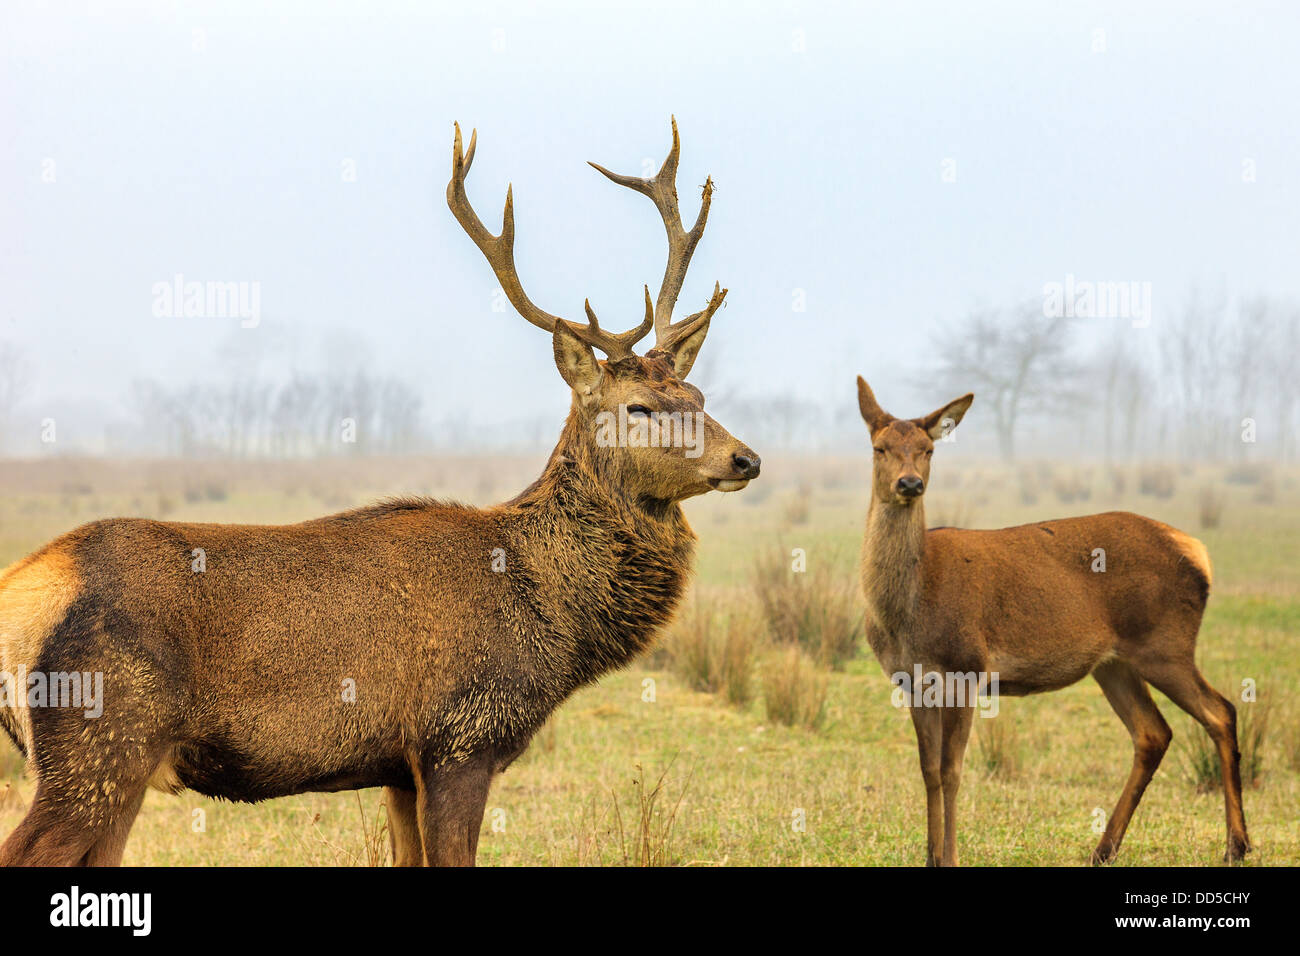 red deer stag and doe in forest landscape of foggy misty Stock Photo